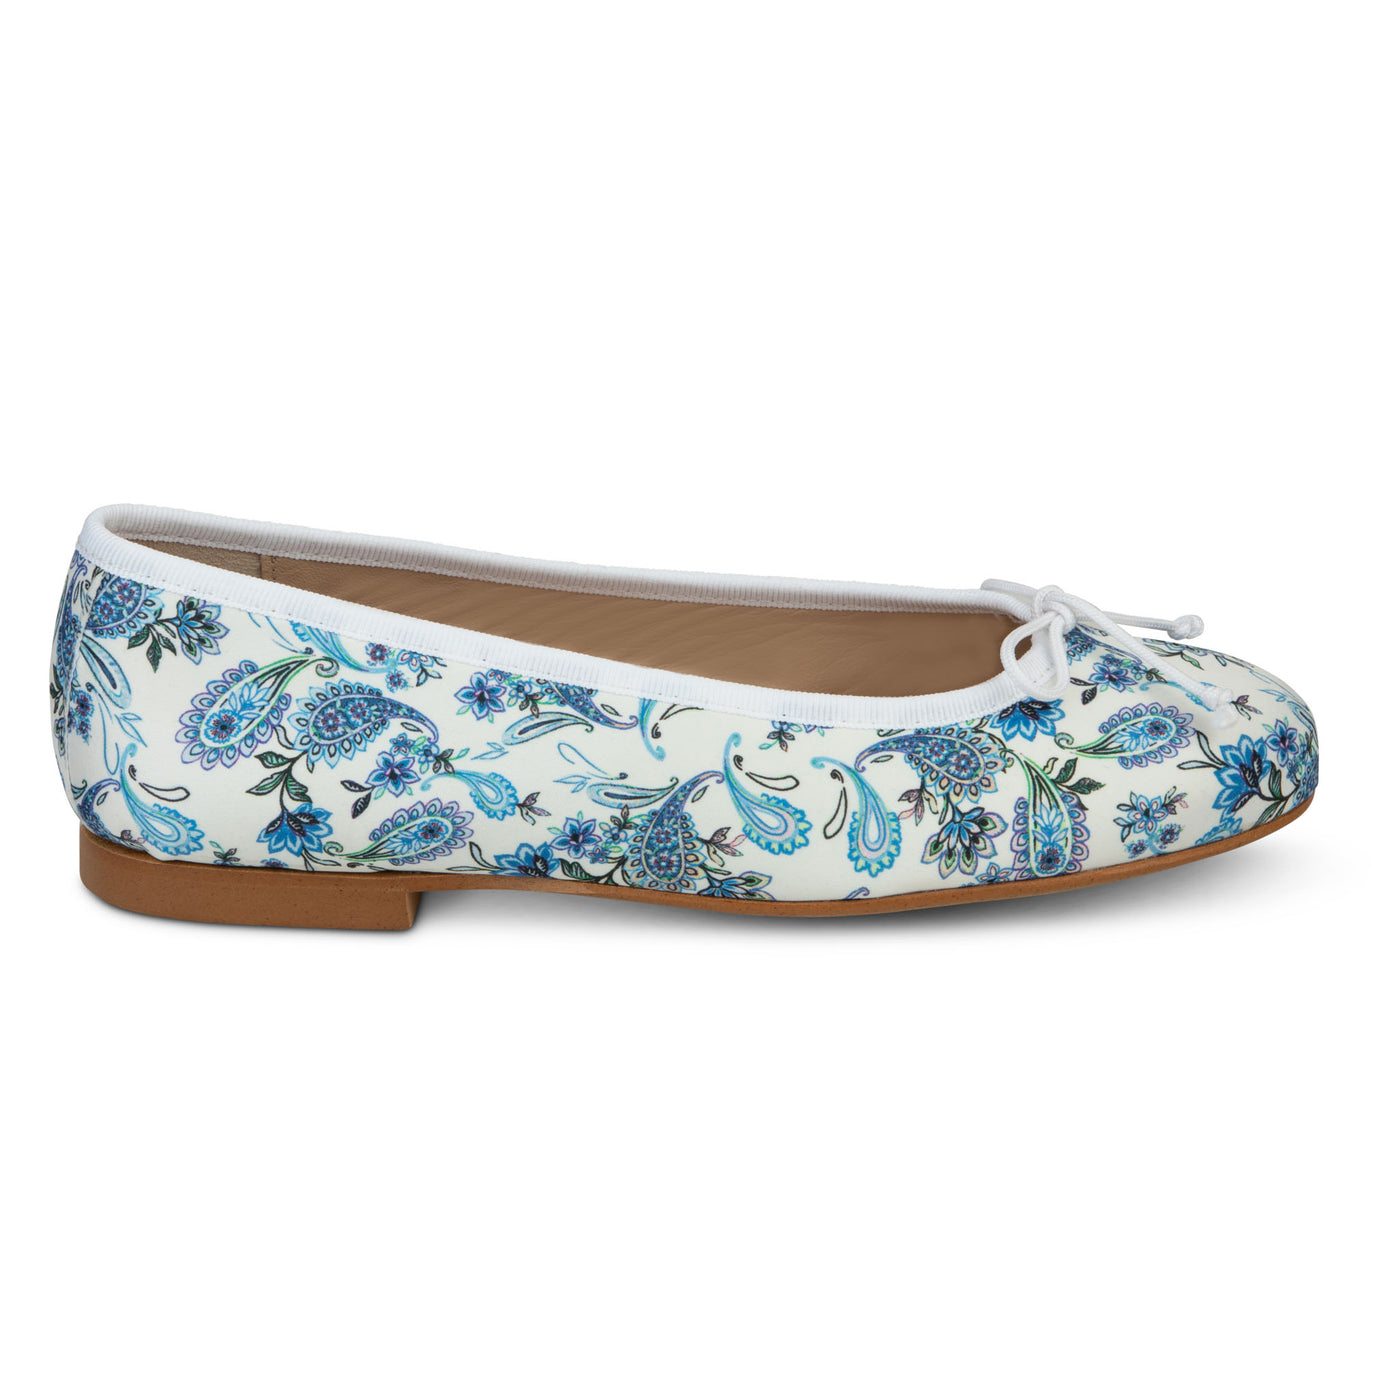 A pair of classic printed ballet flats in azure, featuring a rounded toe and a delicate bow on the front.